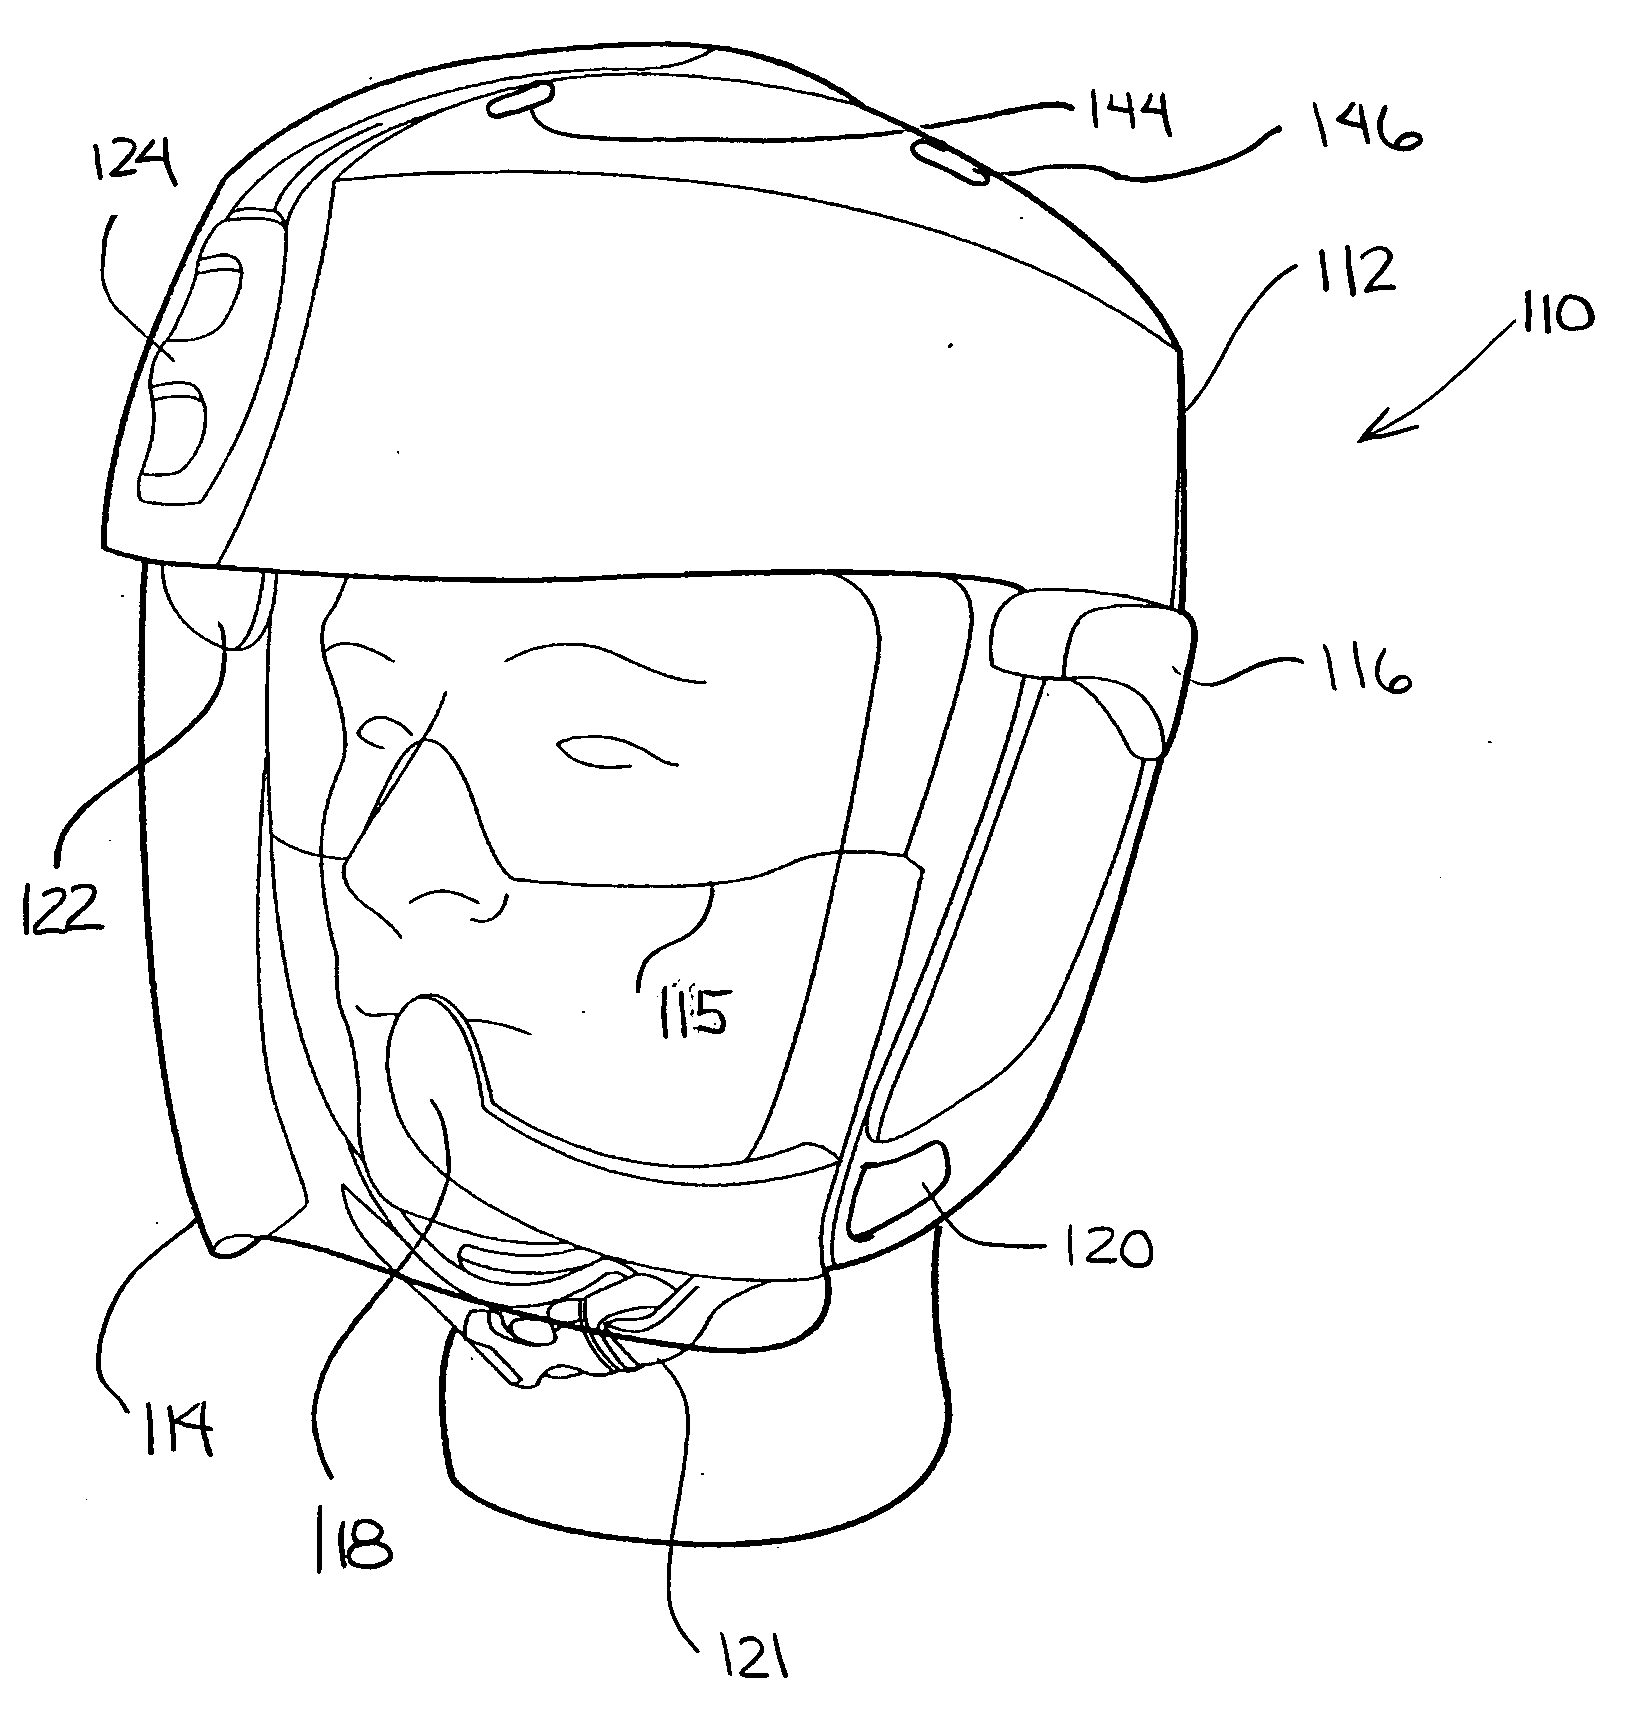 Driver and safety personnel protection apparatus, system and method